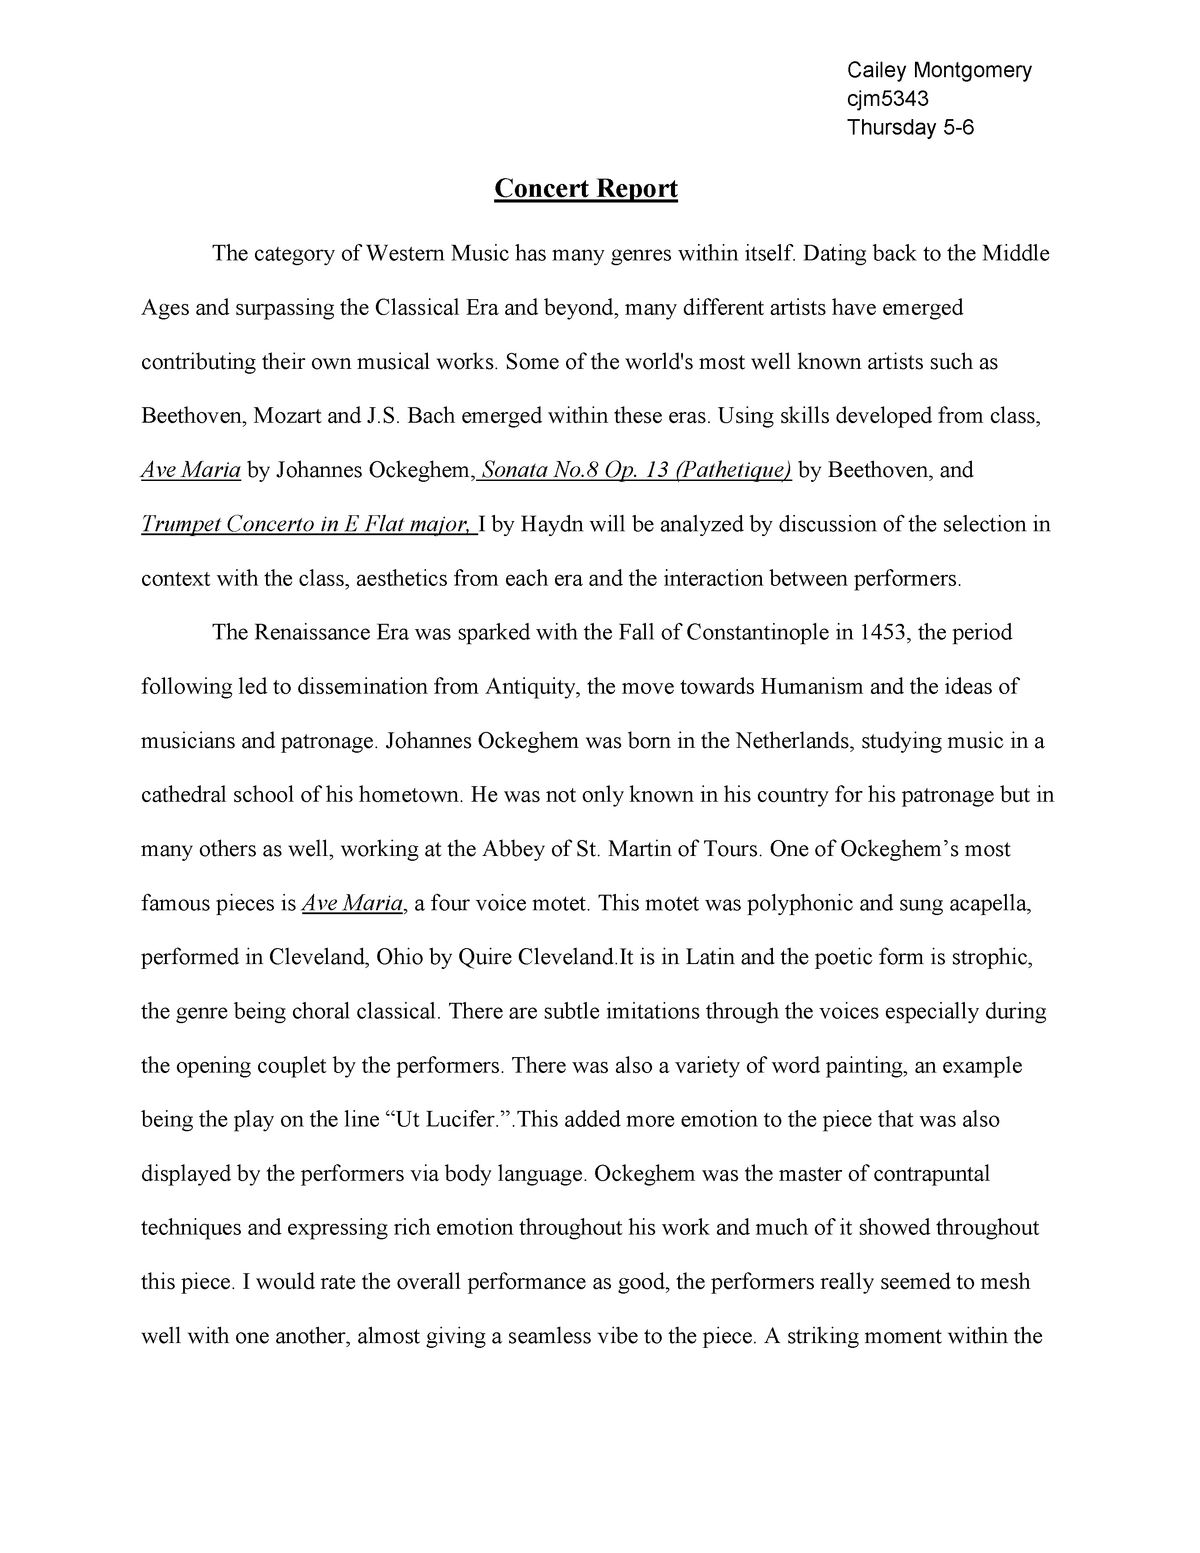 Реферат: Classical Music Concert Report Essay Research Paper